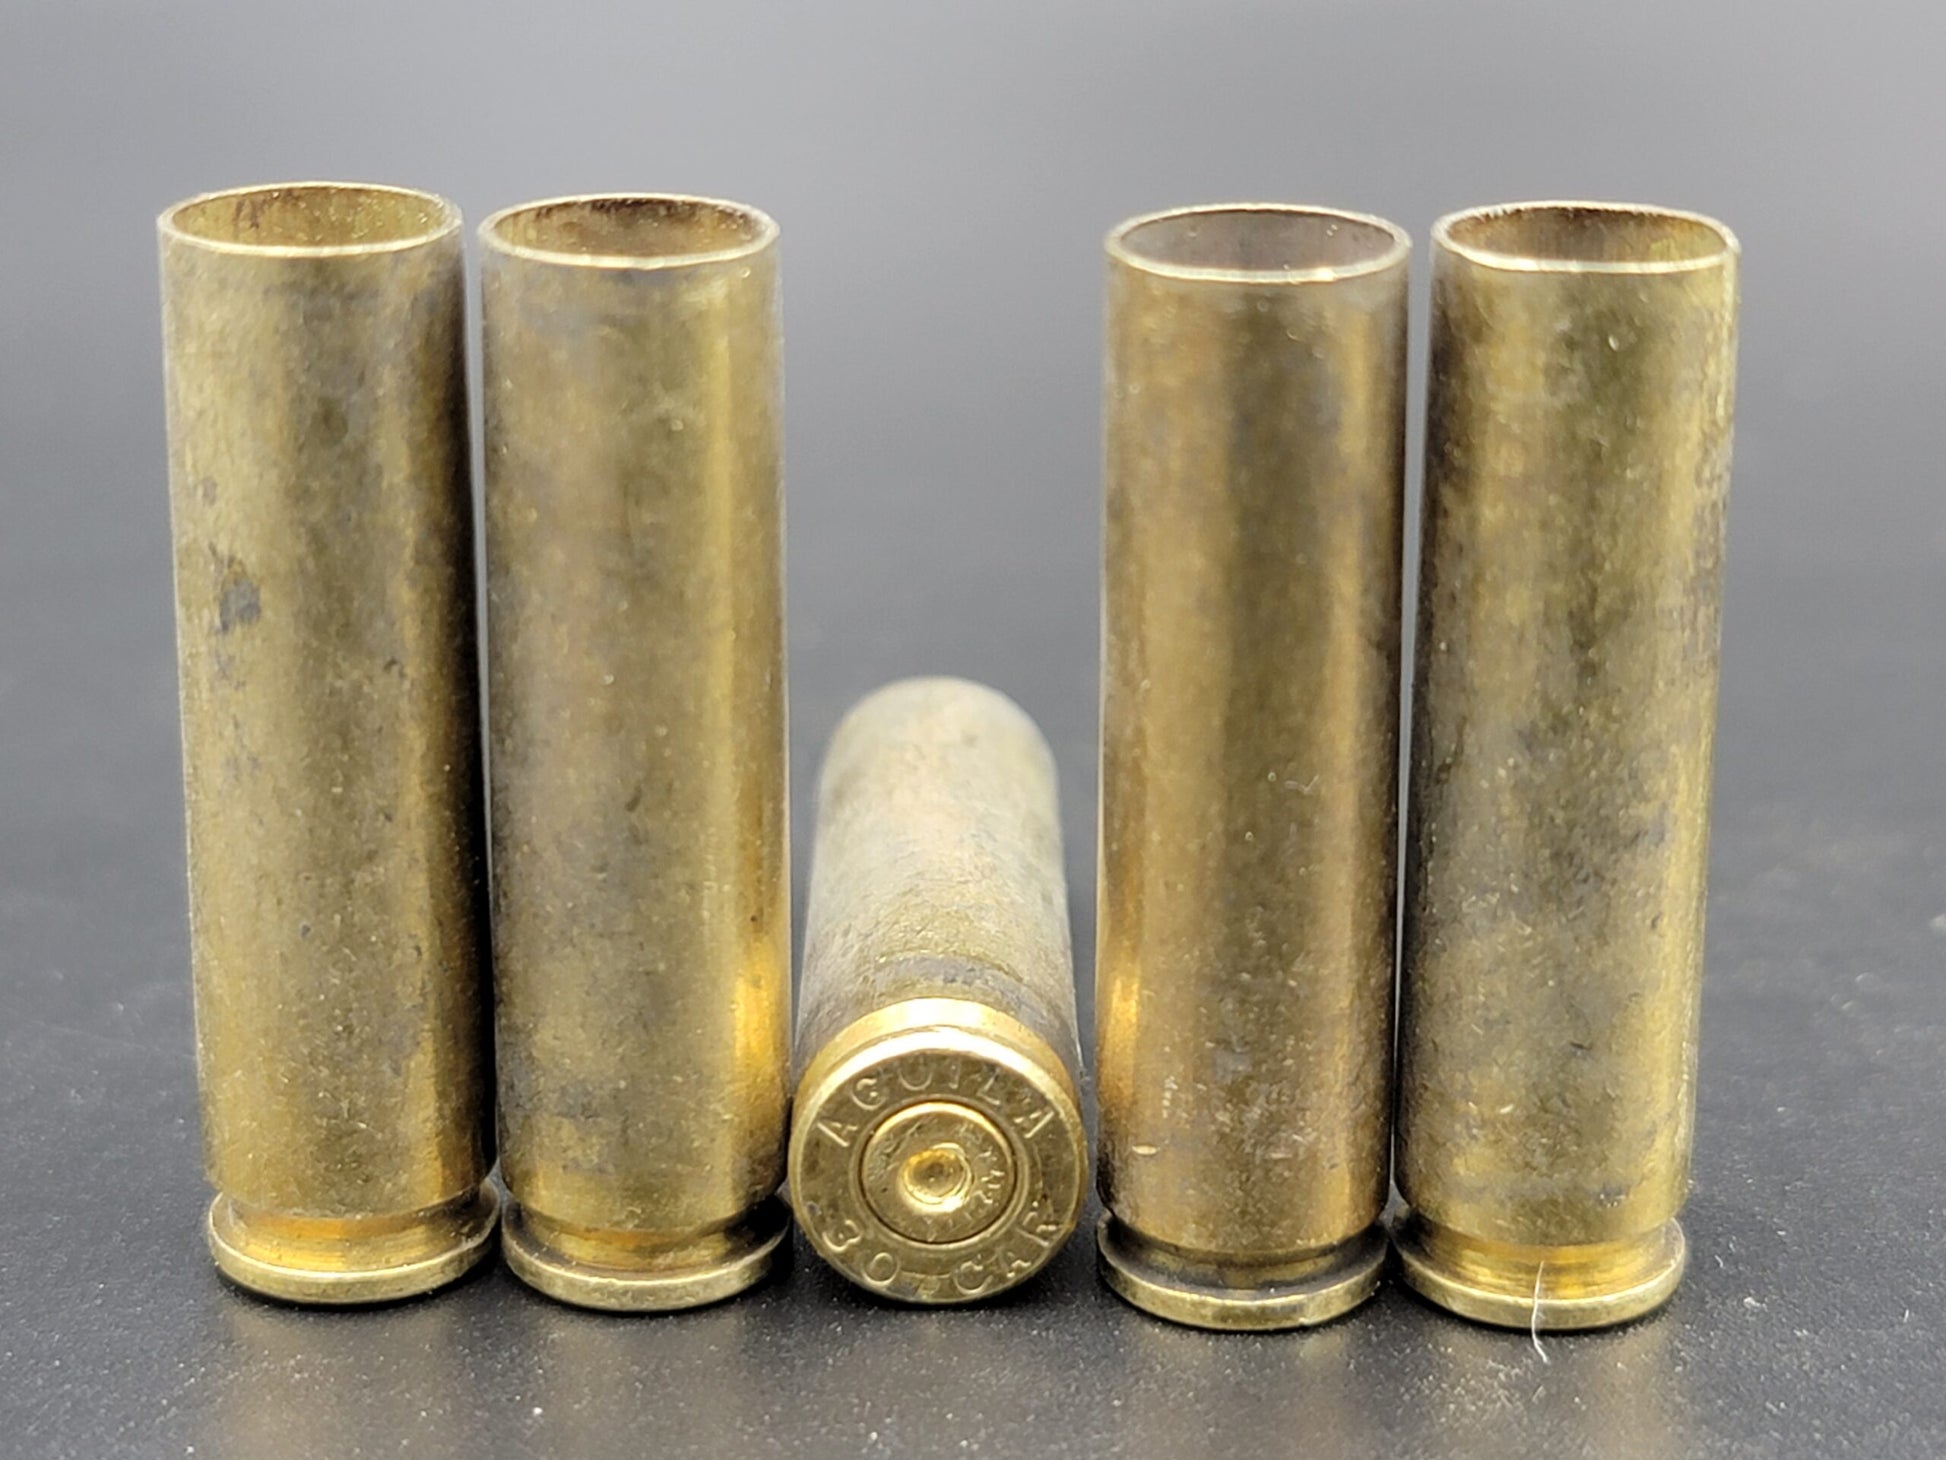 30 Carbine once fired rifle brass. Hand sorted from reputable indoor/military ranges for reloading. Reliable spent casings for precision shooting.